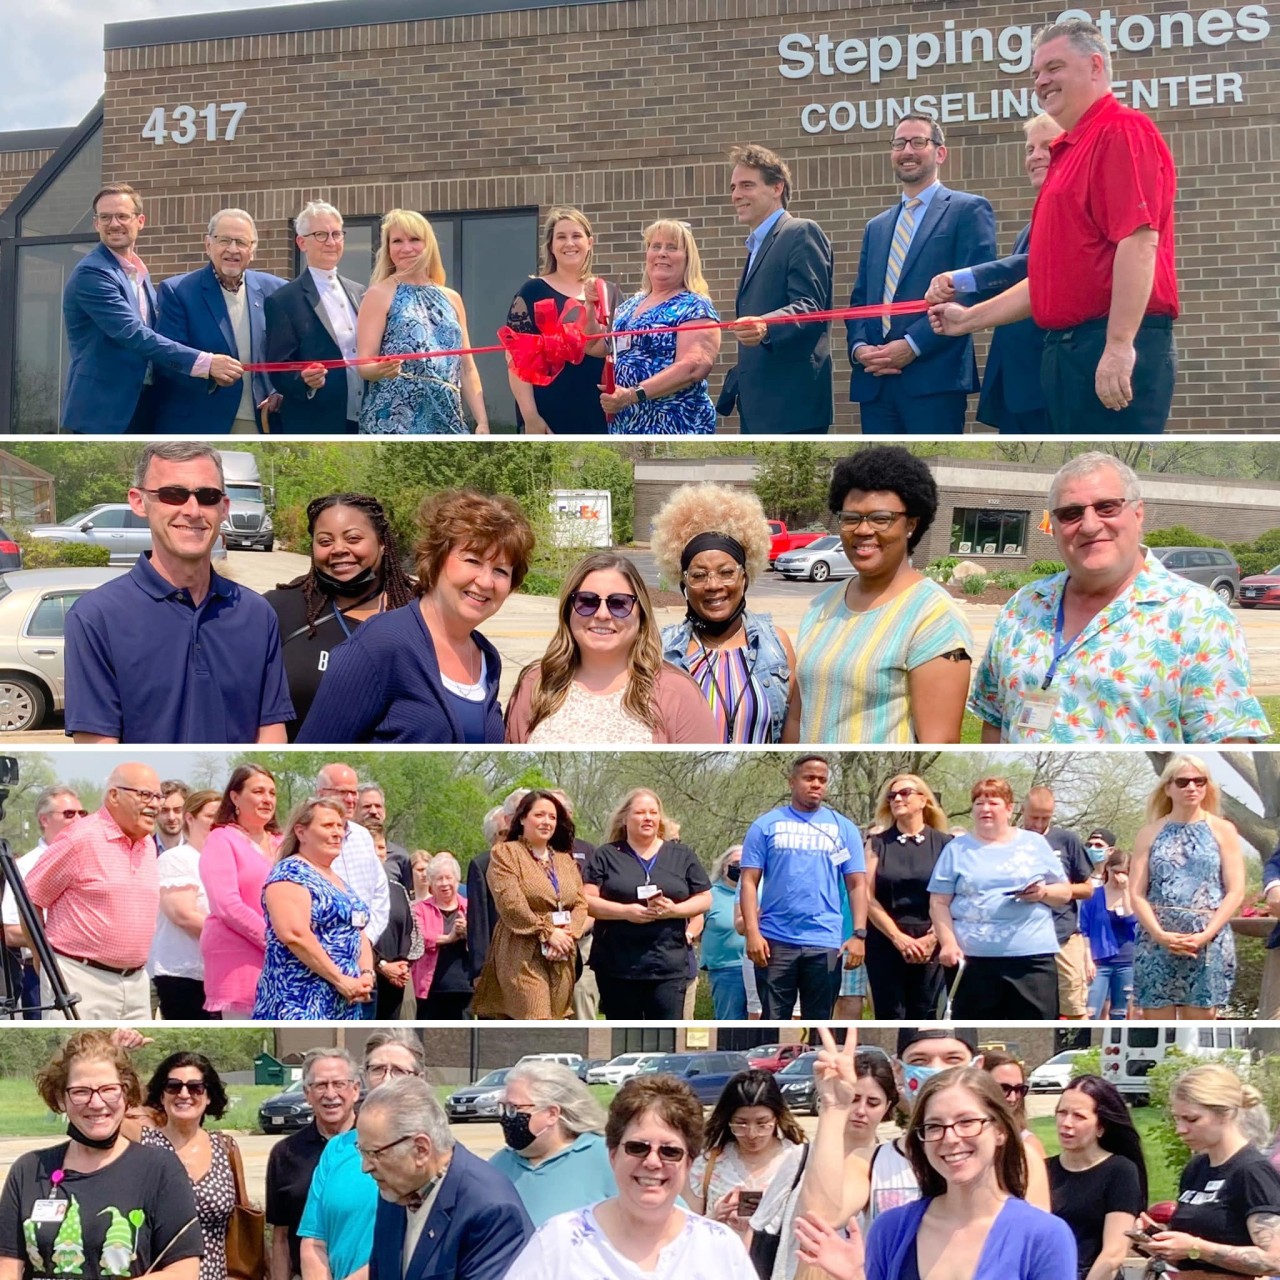 Ribbon-Cutting Festivities at Stepping Stones Counseling Center